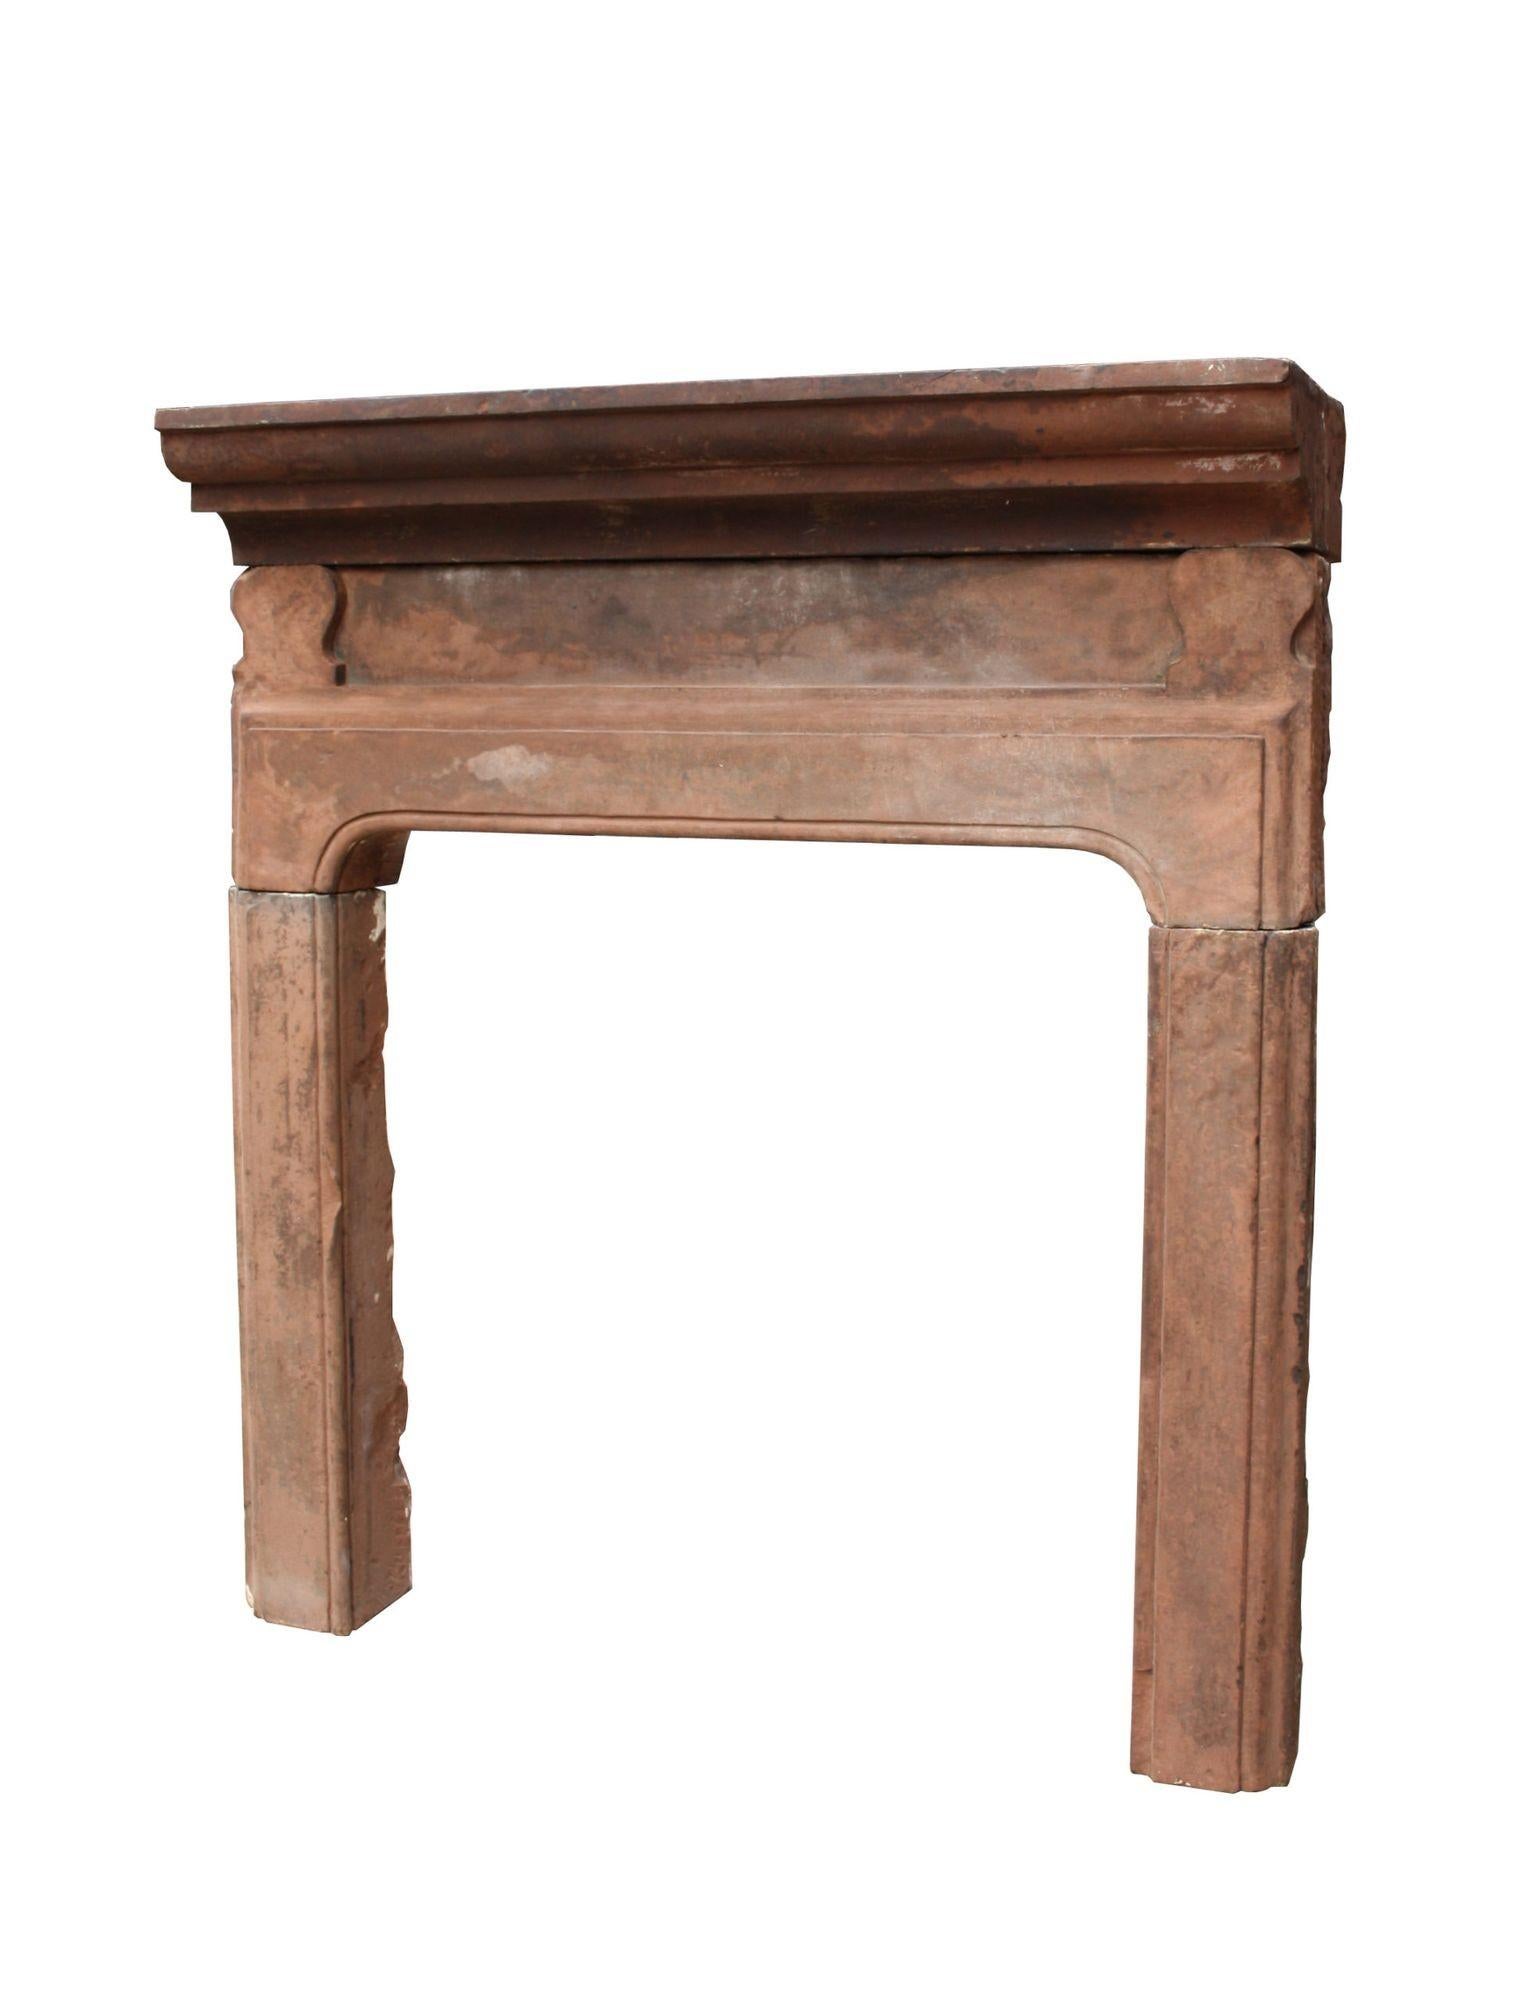 A mid 18th century English chimneypiece, carved from red sandstone. This fire mantel was salvaged from a farmhouse in the peak district.

Opening Height 98 cm (38.58 in)
Opening Width 96 cm (37.79 in)